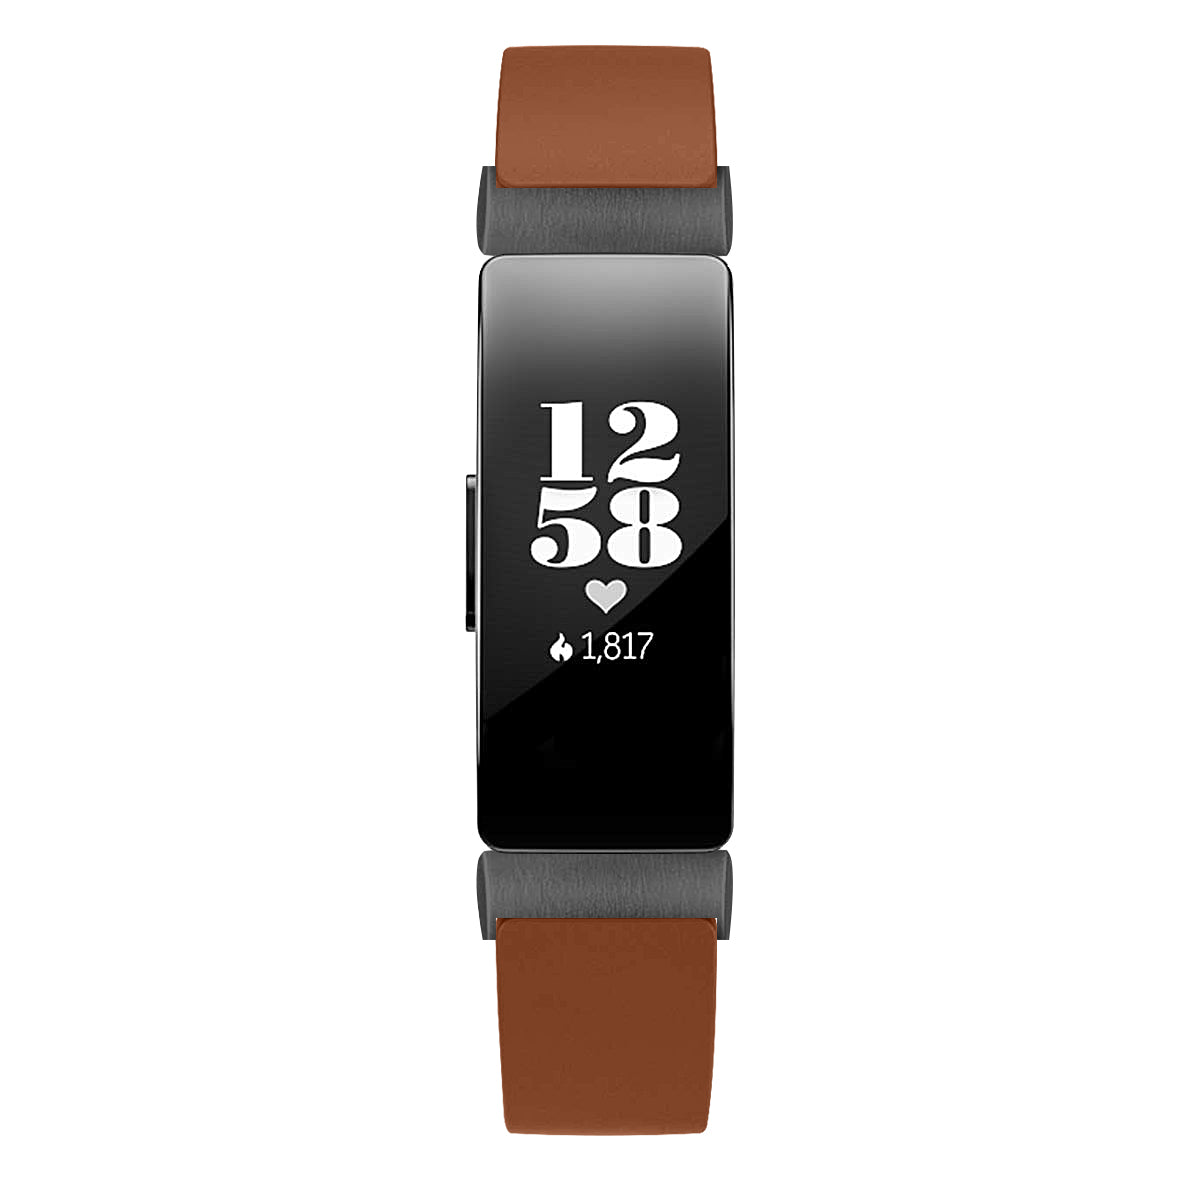 Watch Bands For Fitbit Inspire 2 /Inspire HR /Inspire Genuine Leather Band  Strap